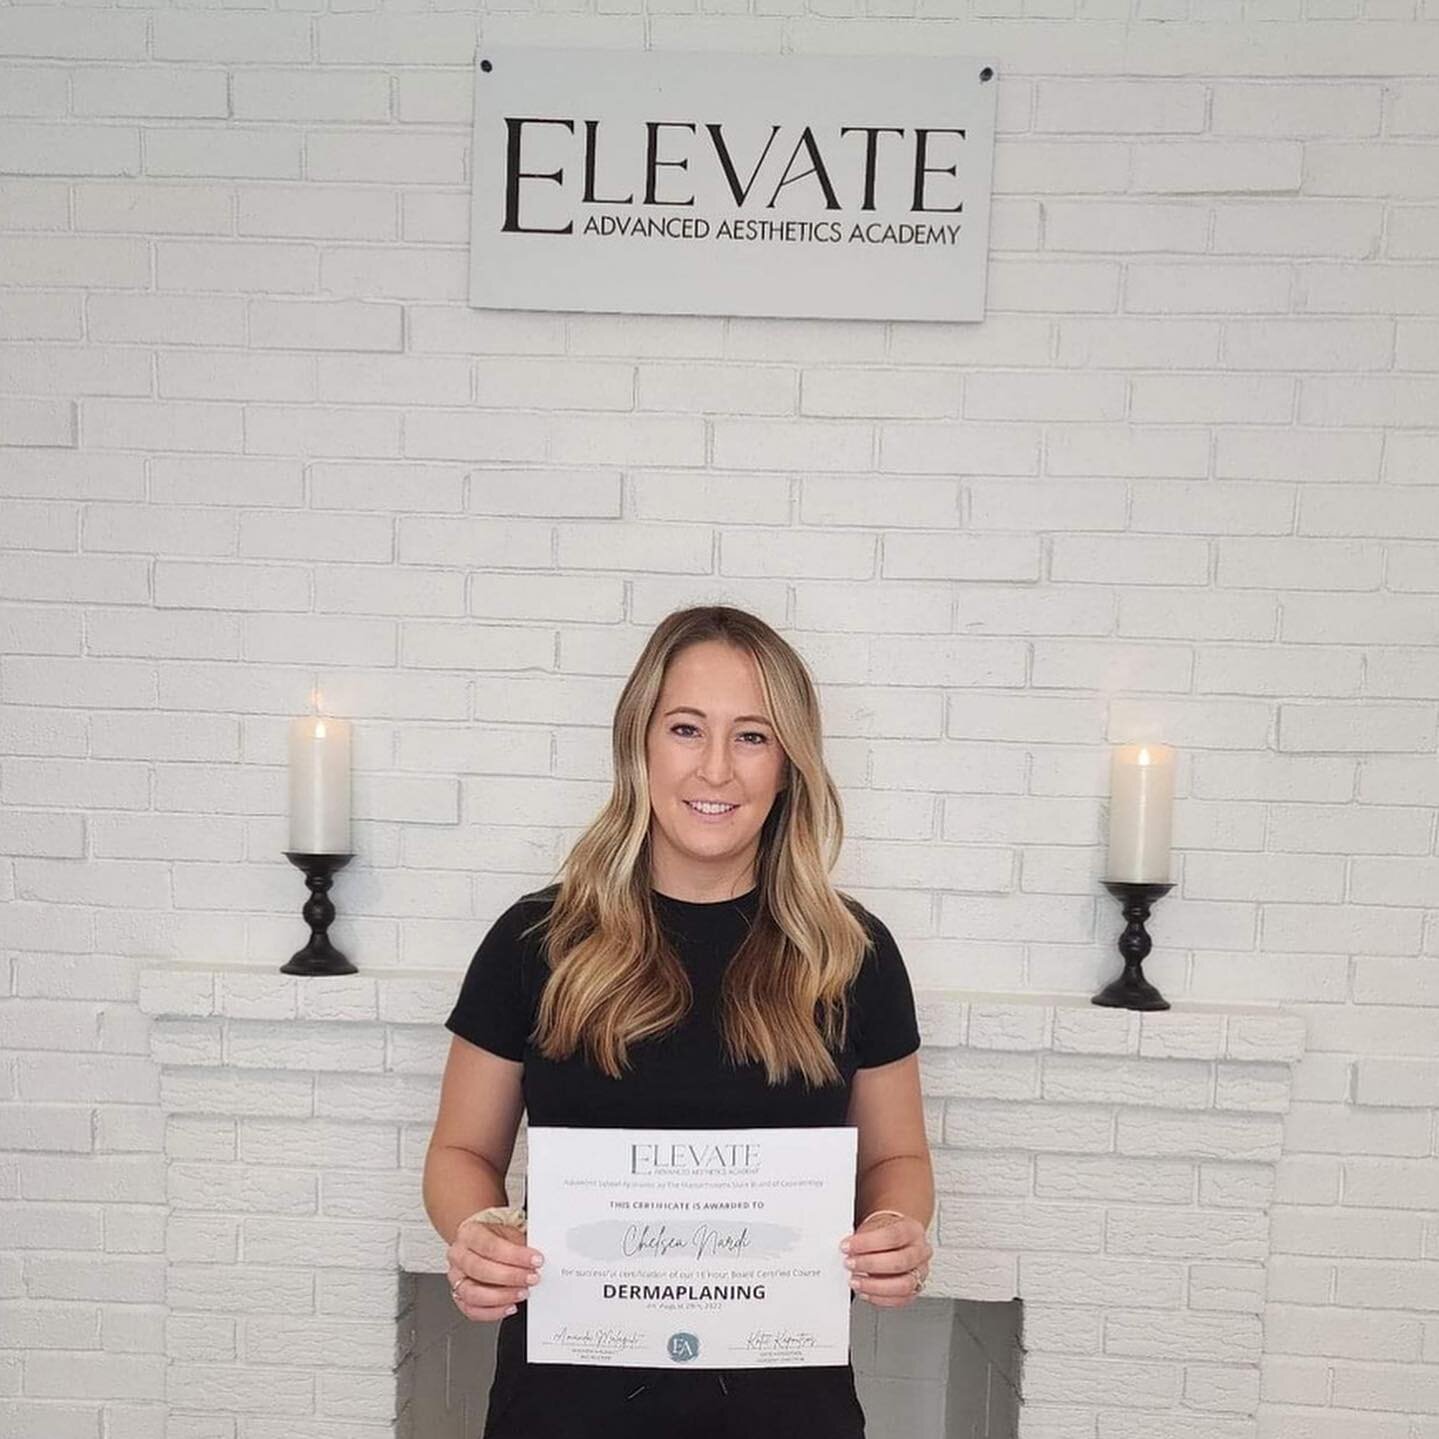 Congratulations Chelsea from The Beauty Room on your board certification in Dermaplaning! You did amazing and we can't wait to see pictures of your work! Go give Chelsea and The beauty room a follow @lashesbychelsean &amp; @thebeautyroom13 !!
⠀⠀⠀⠀⠀⠀⠀